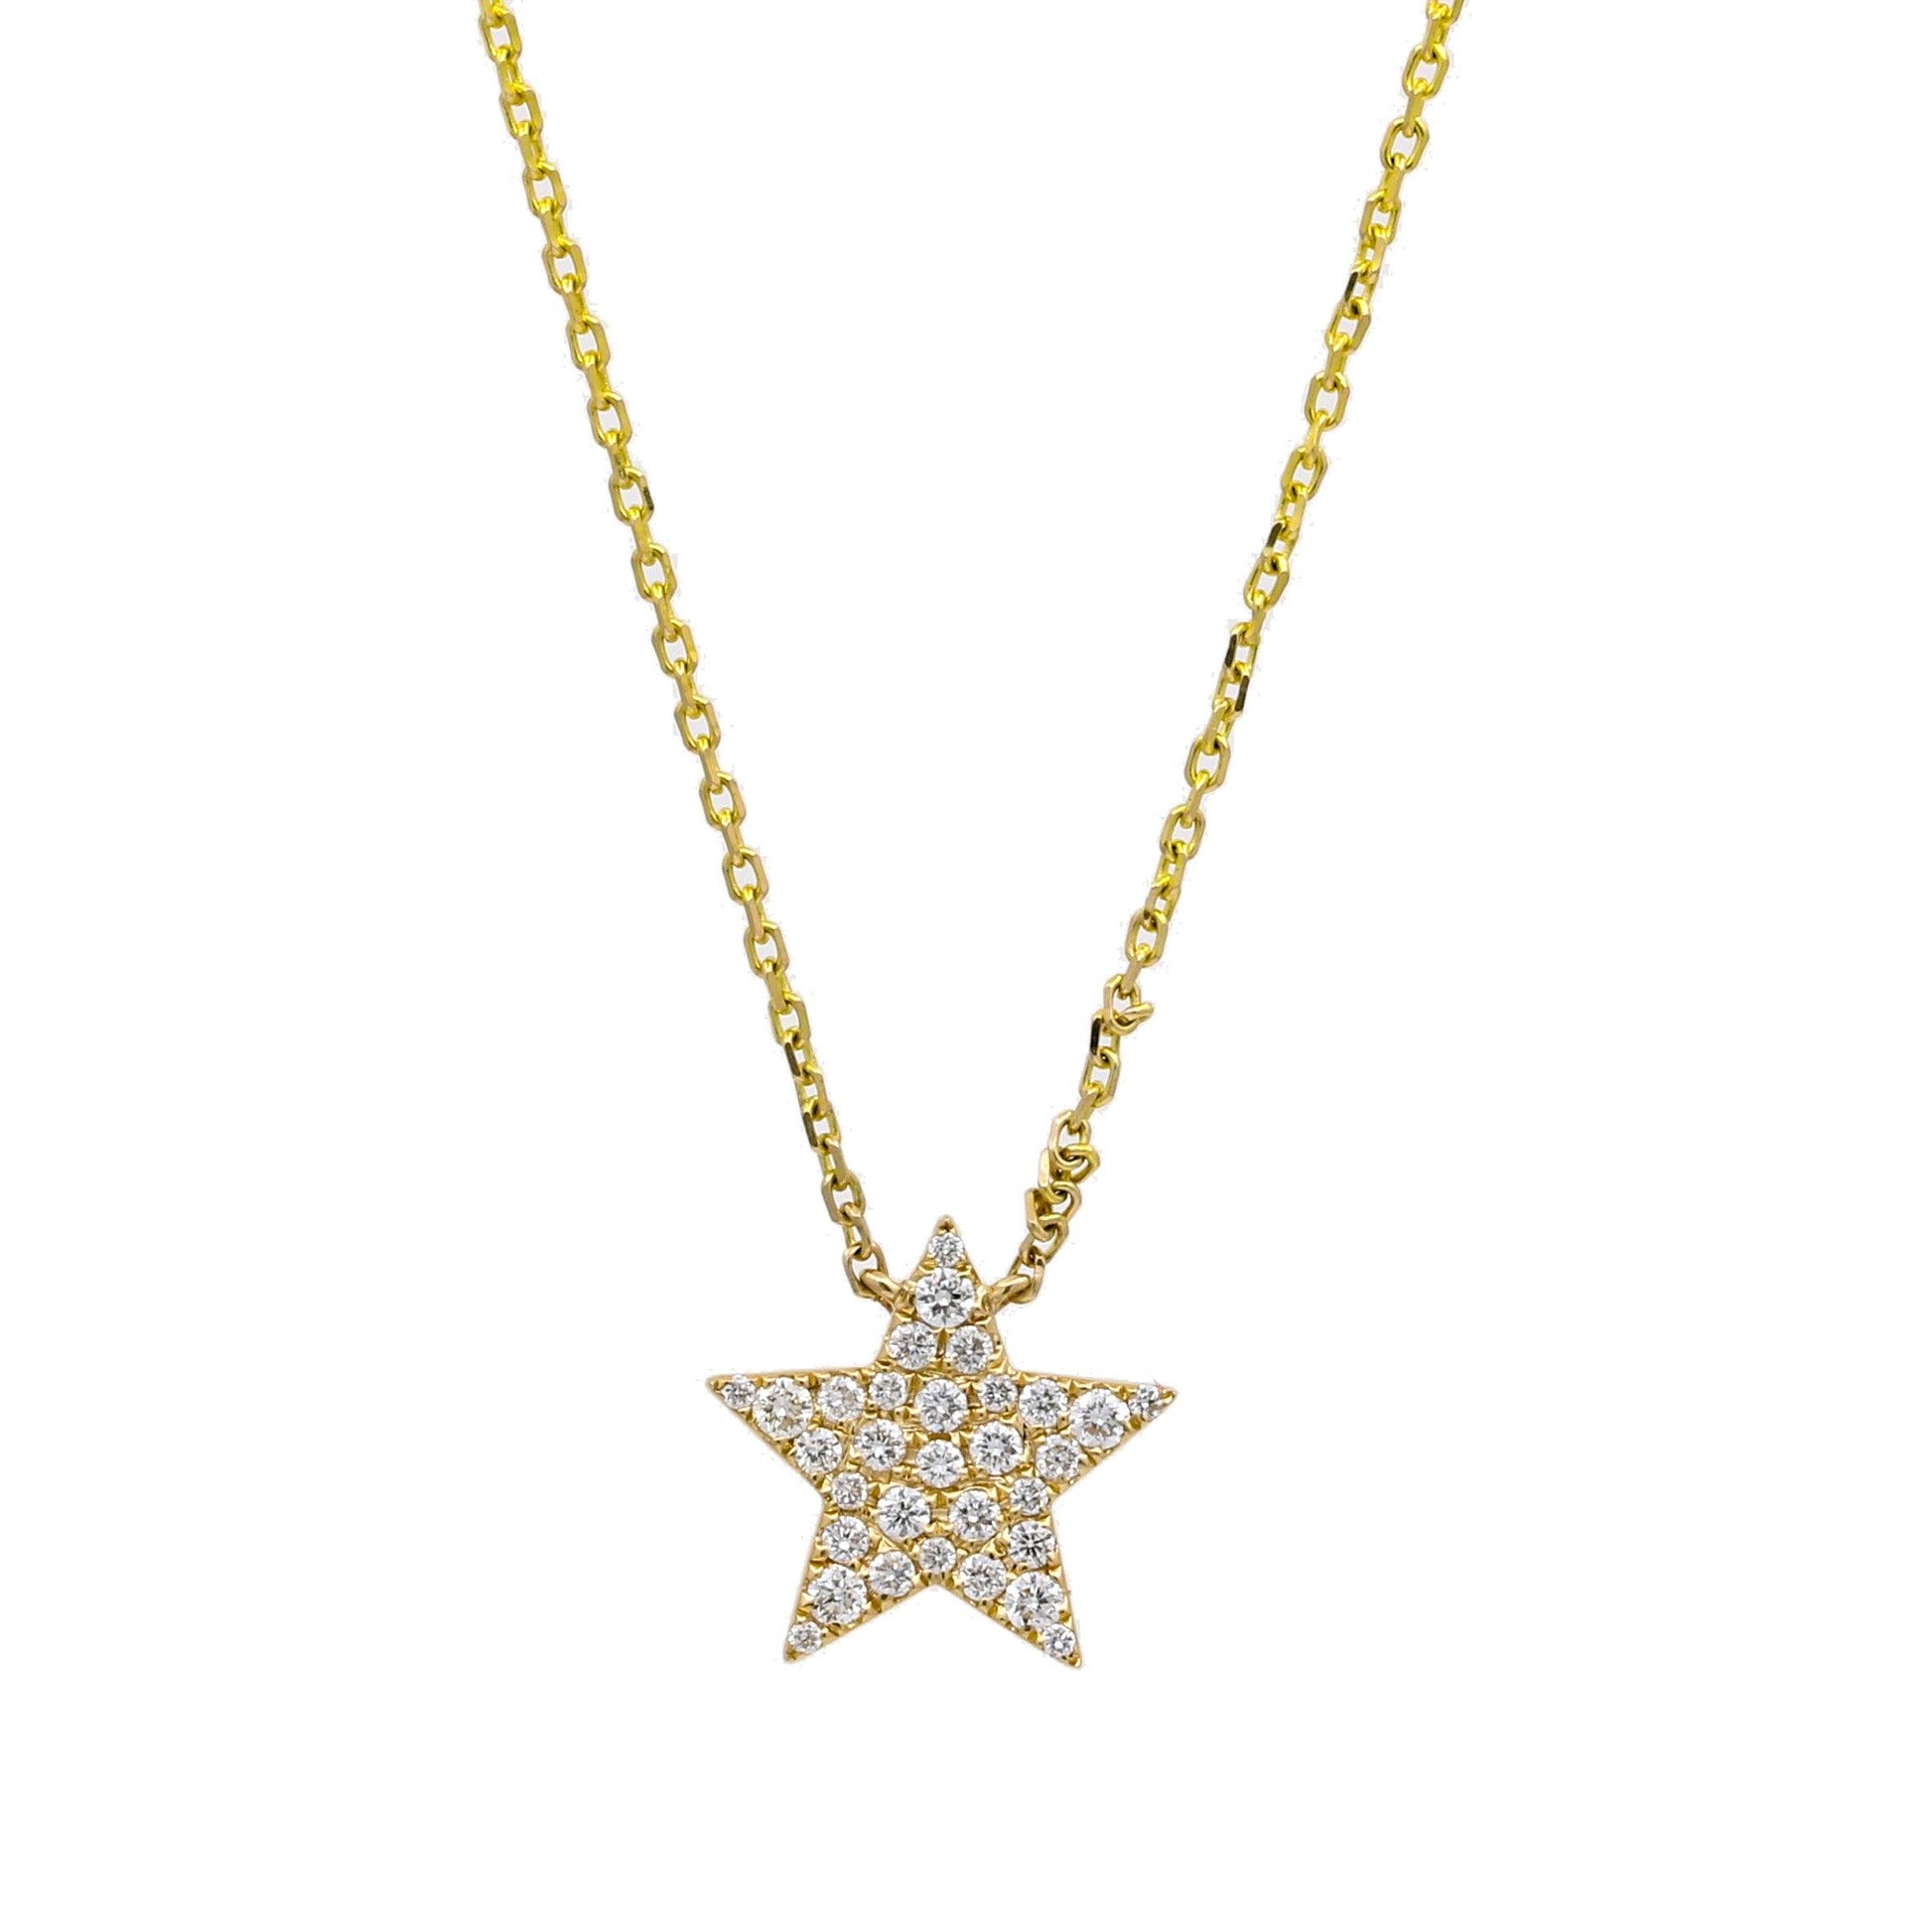 Women's Pave Diamond Star Pendant Necklace in 14k Yellow Gold - 31 Jewels Inc.